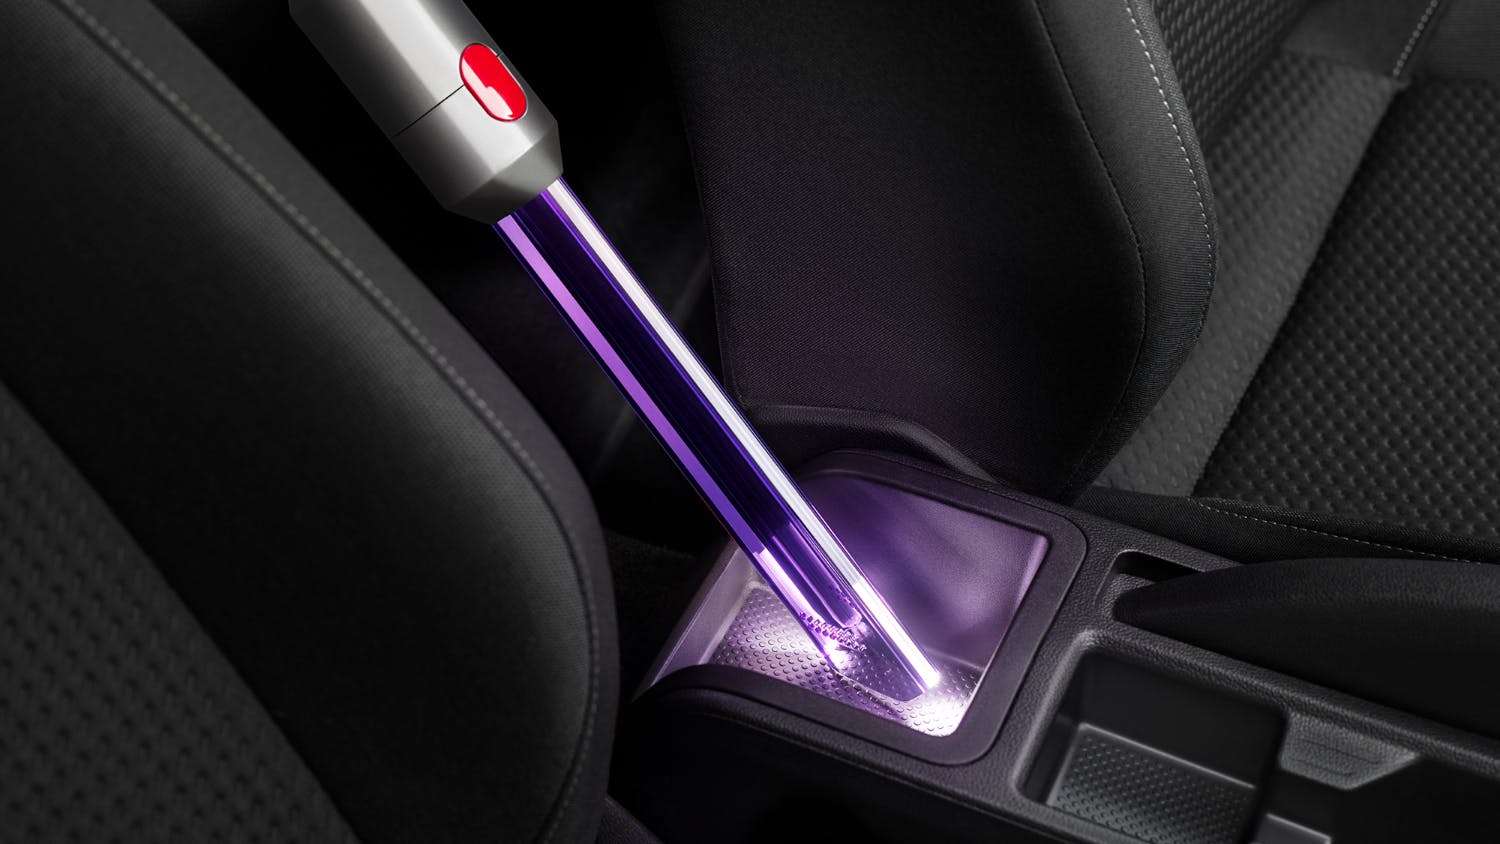 Dyson Light Pipe Crevice Tool Vacuum Attachment